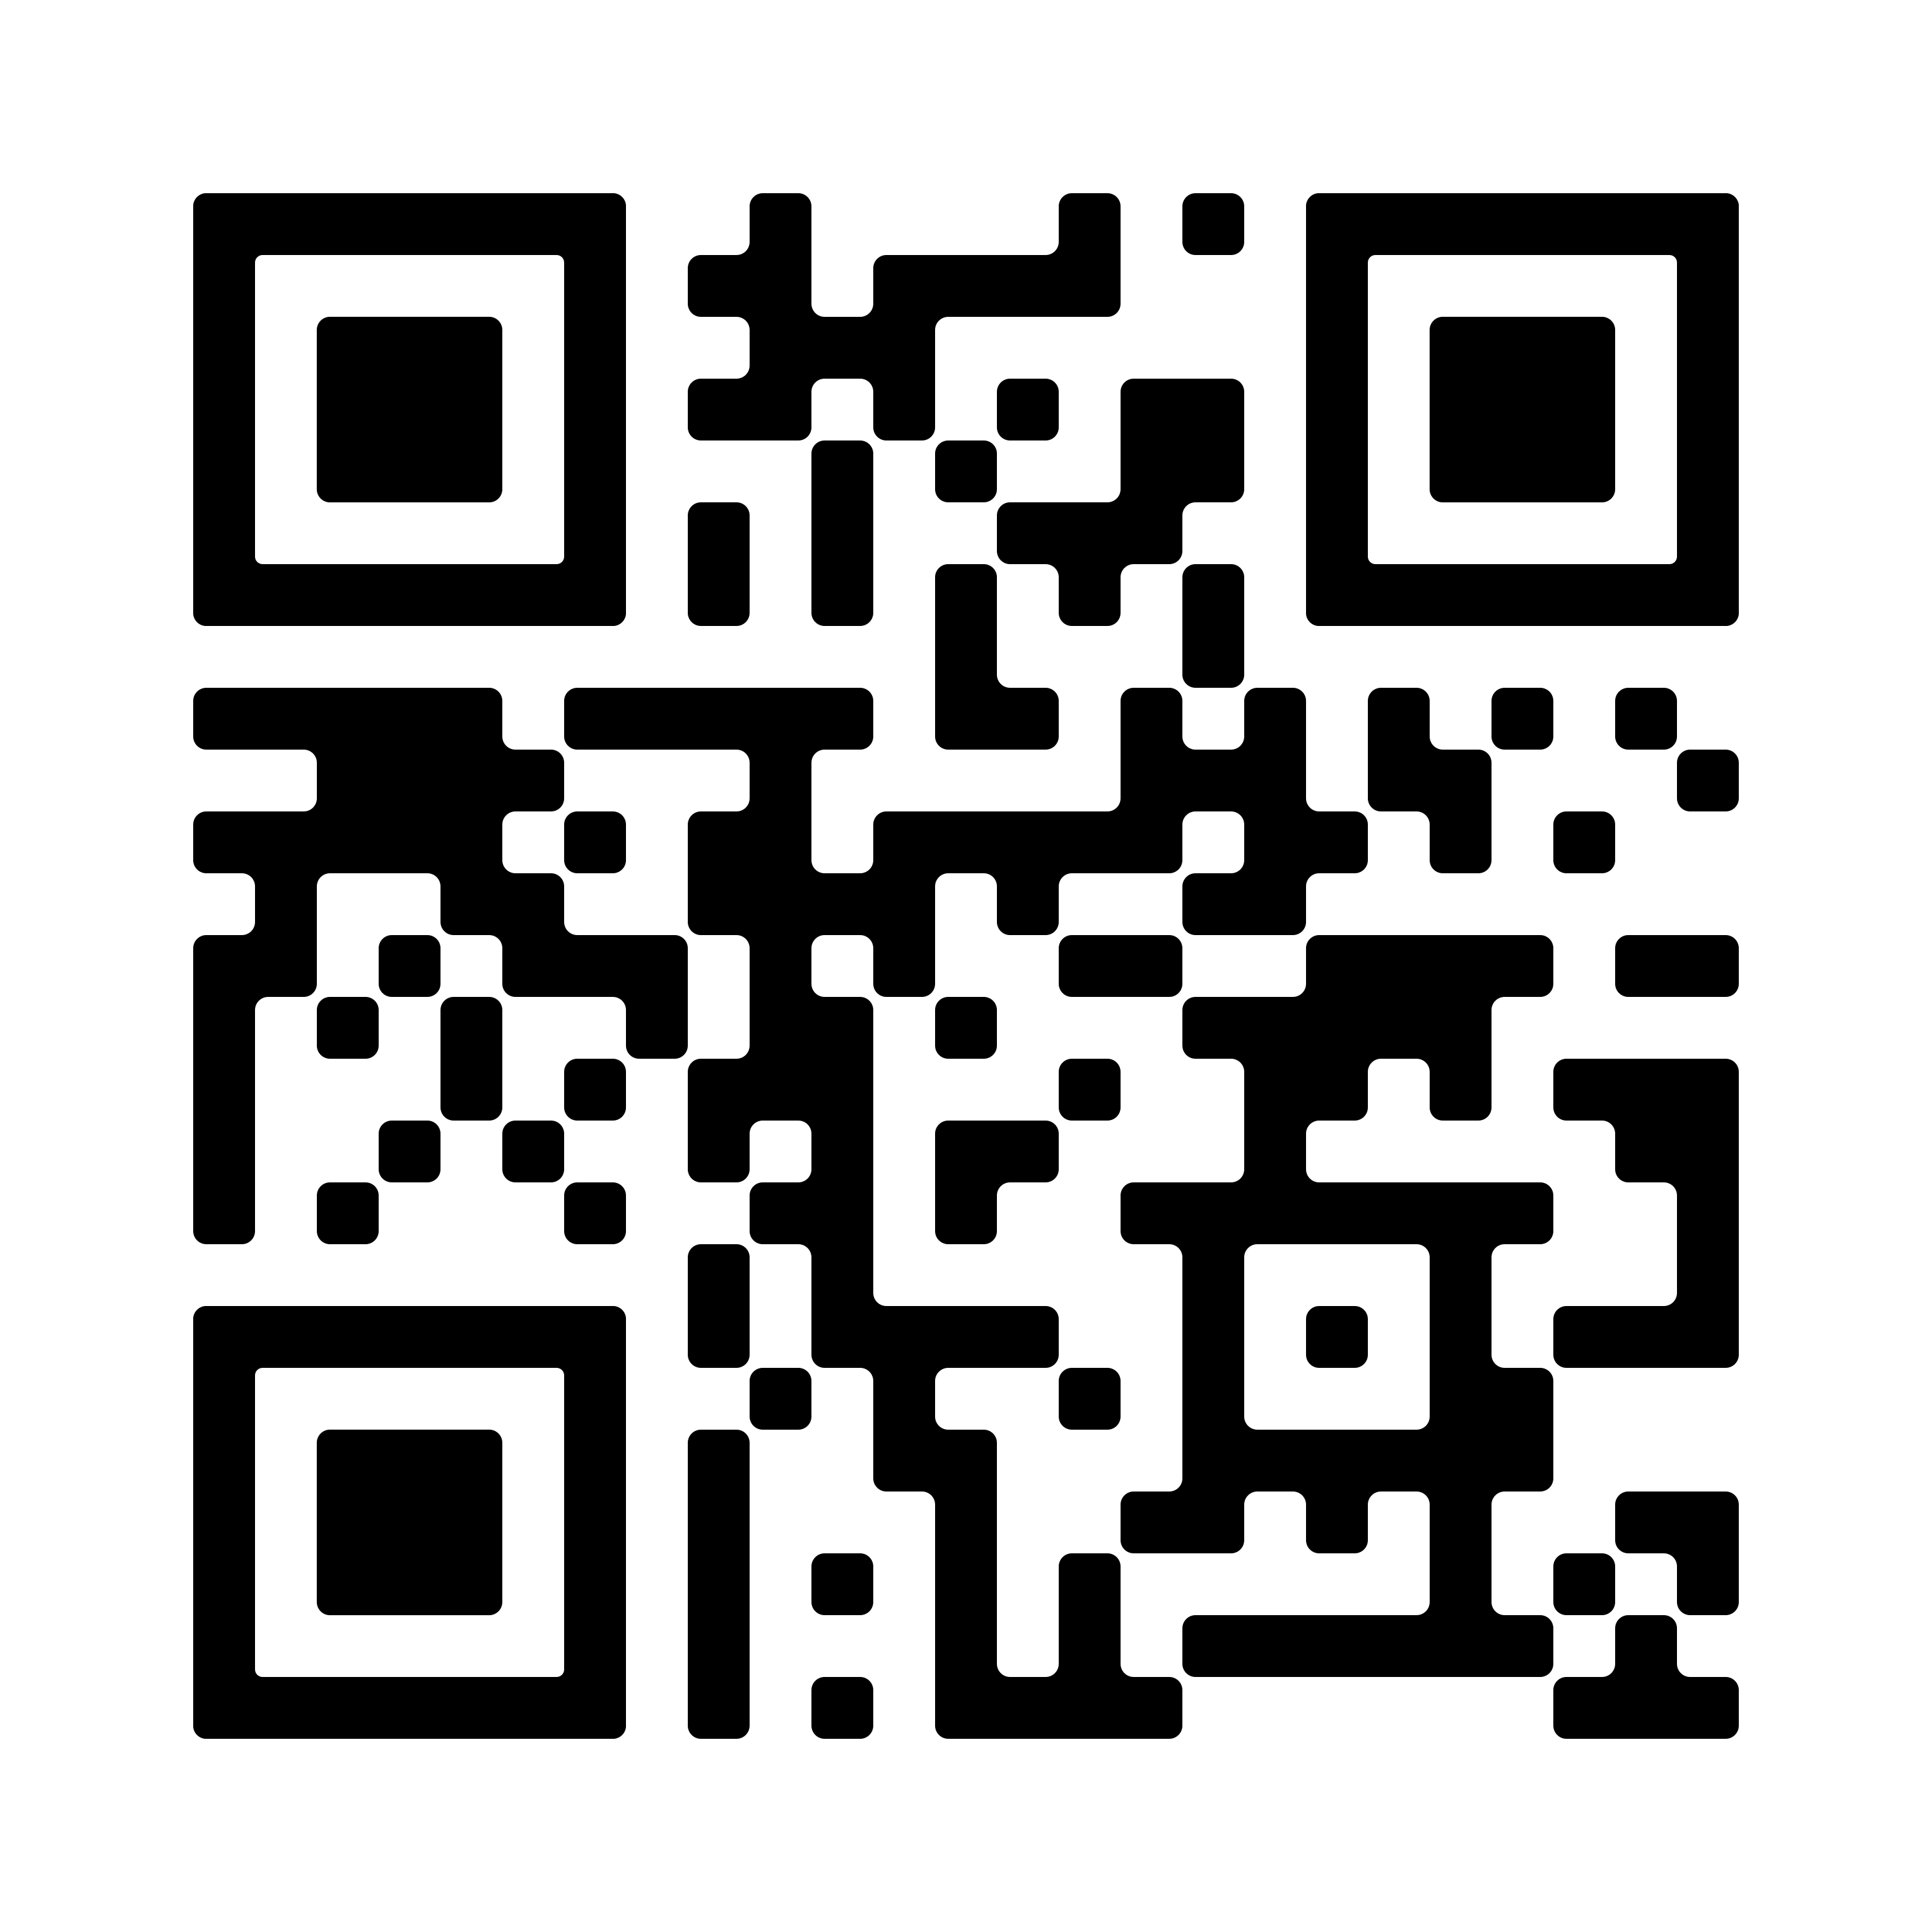 QR code leading to the app on Google Play.